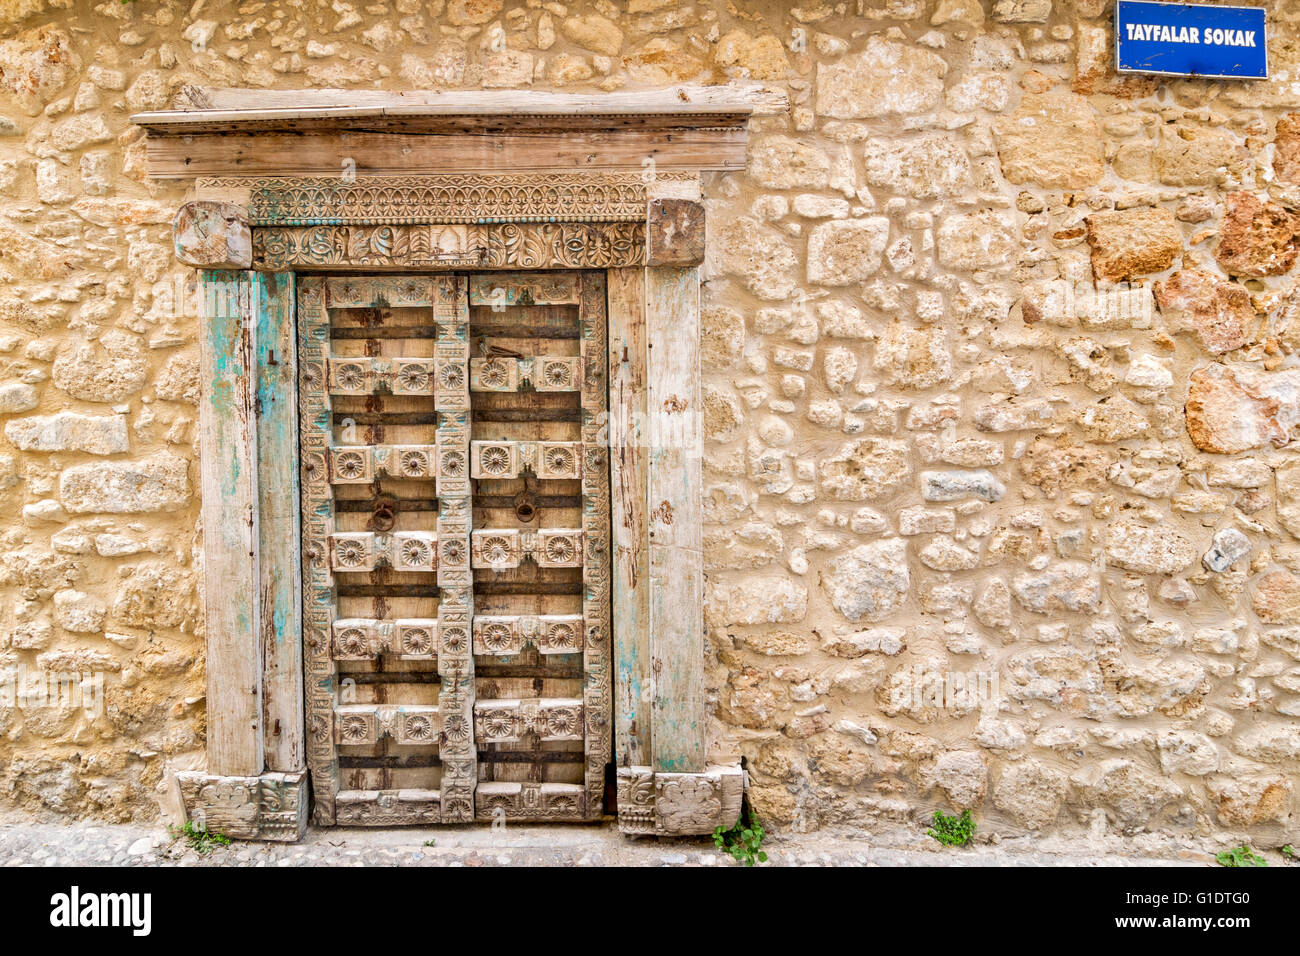 NORTH CYPRUS KYRENIA OLD TOWN CARVED WOODEN DOOR AND OLD STONE WALL WITH STREET SIGN TAYFALAR SOKAK Stock Photo